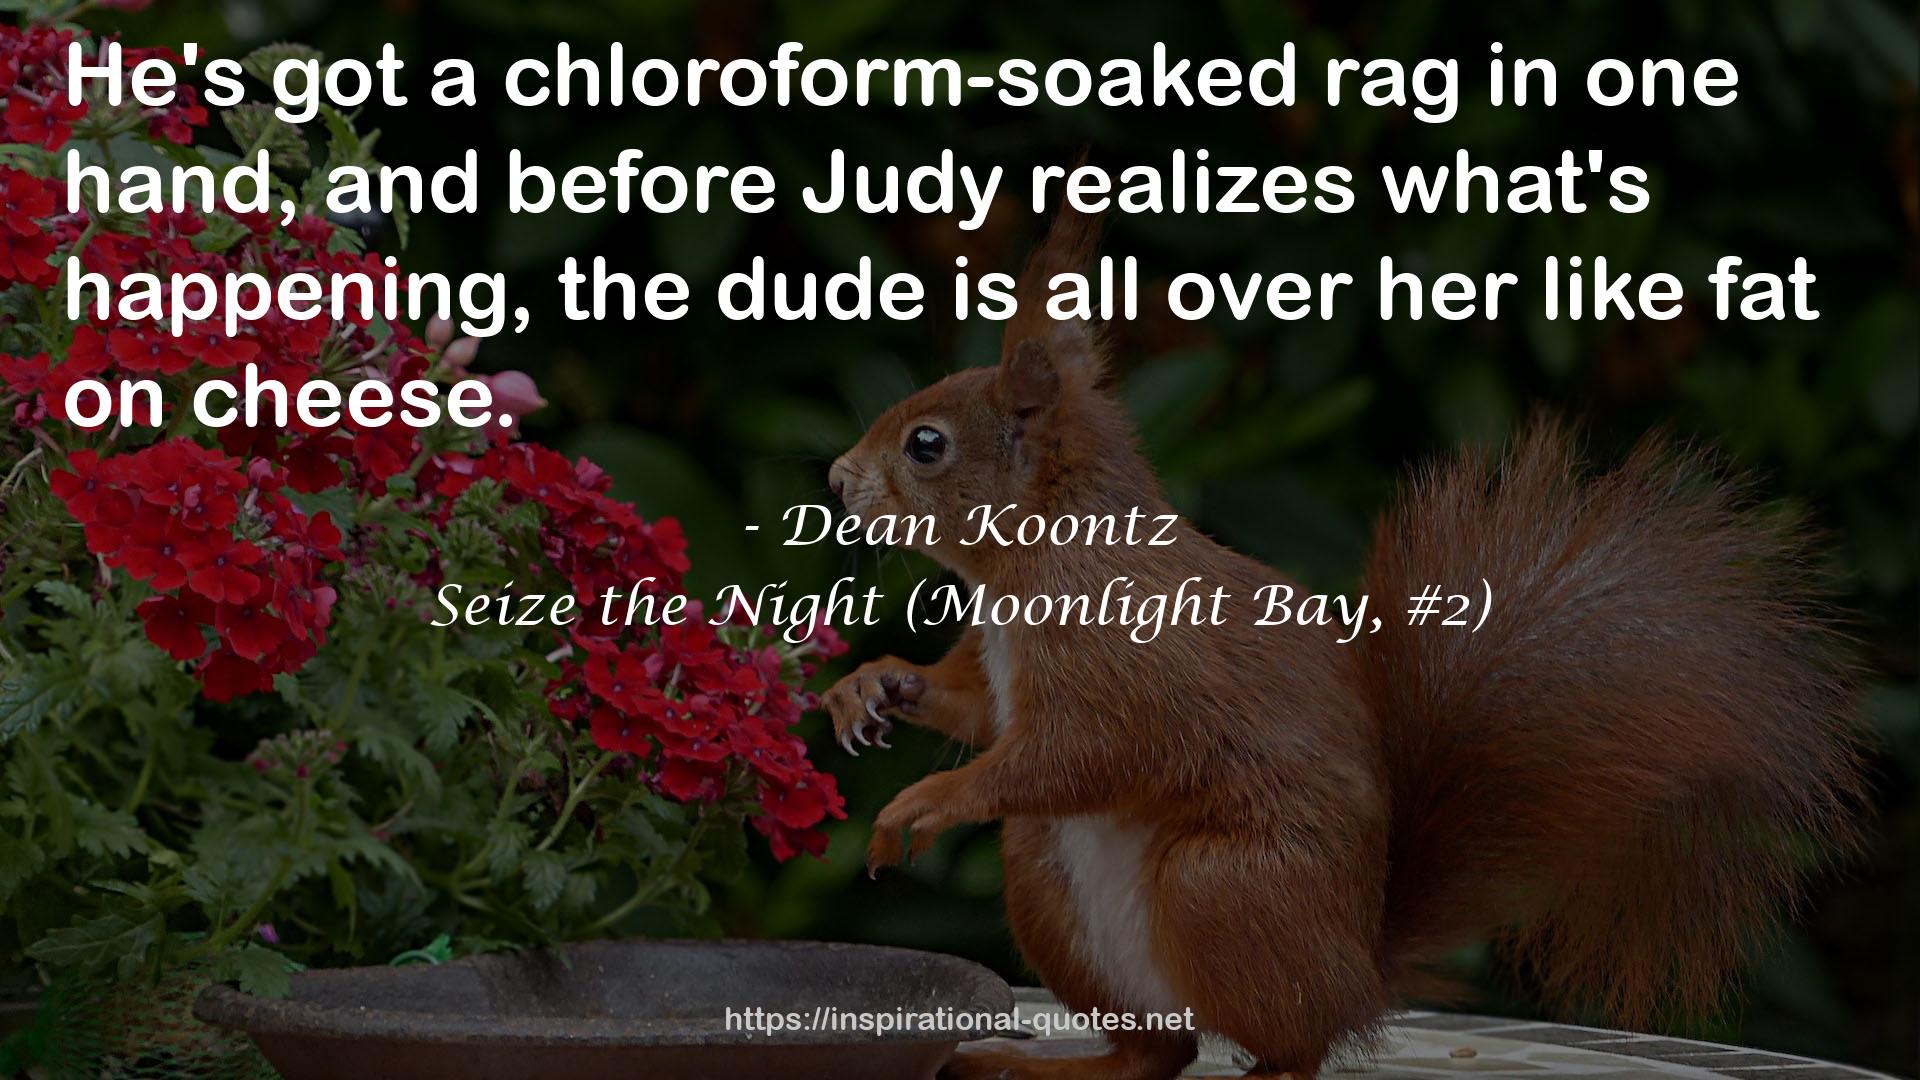 a chloroform-soaked rag  QUOTES